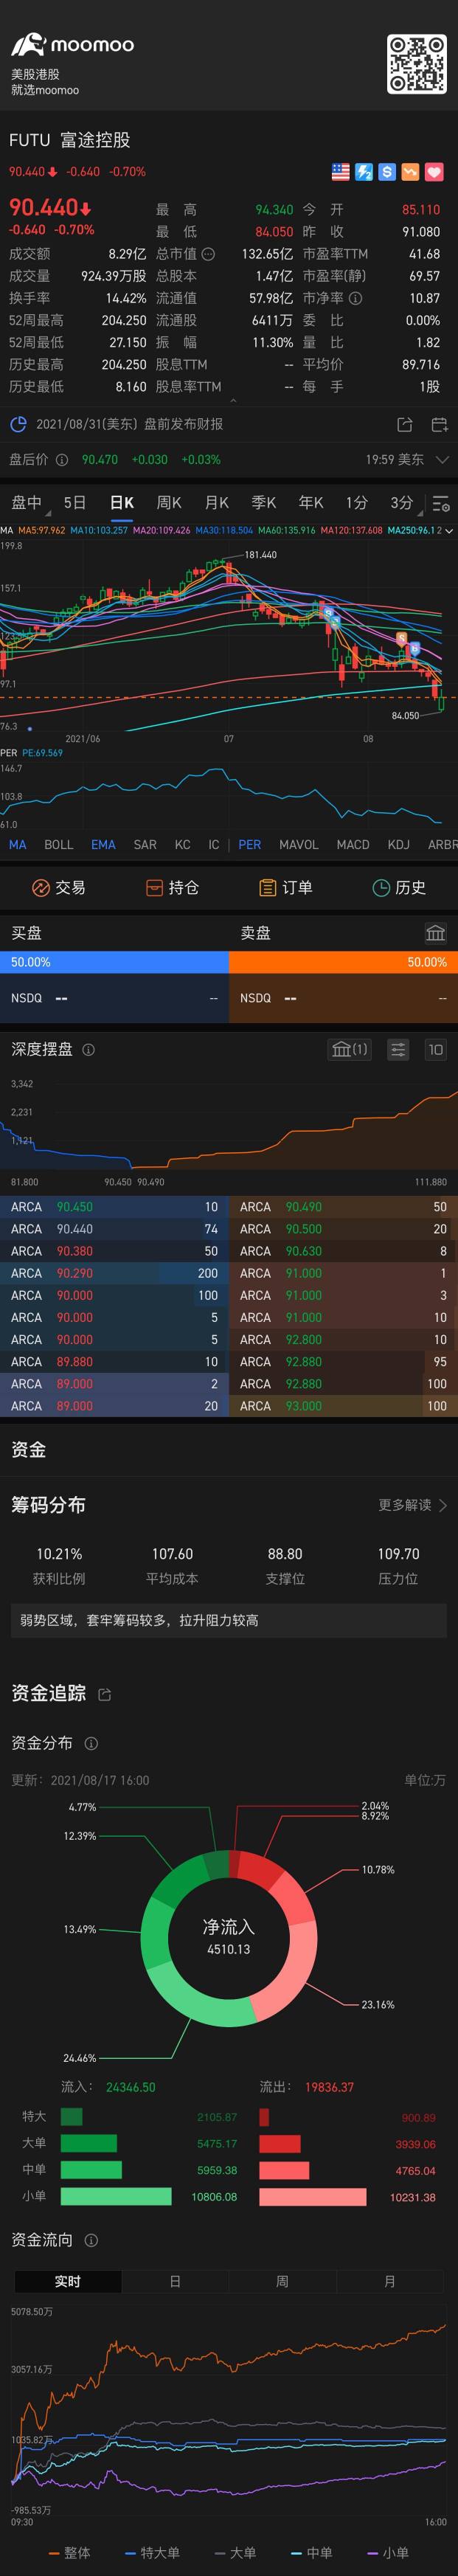 The after-hours price of Moomoo Apps is different from the current market price.